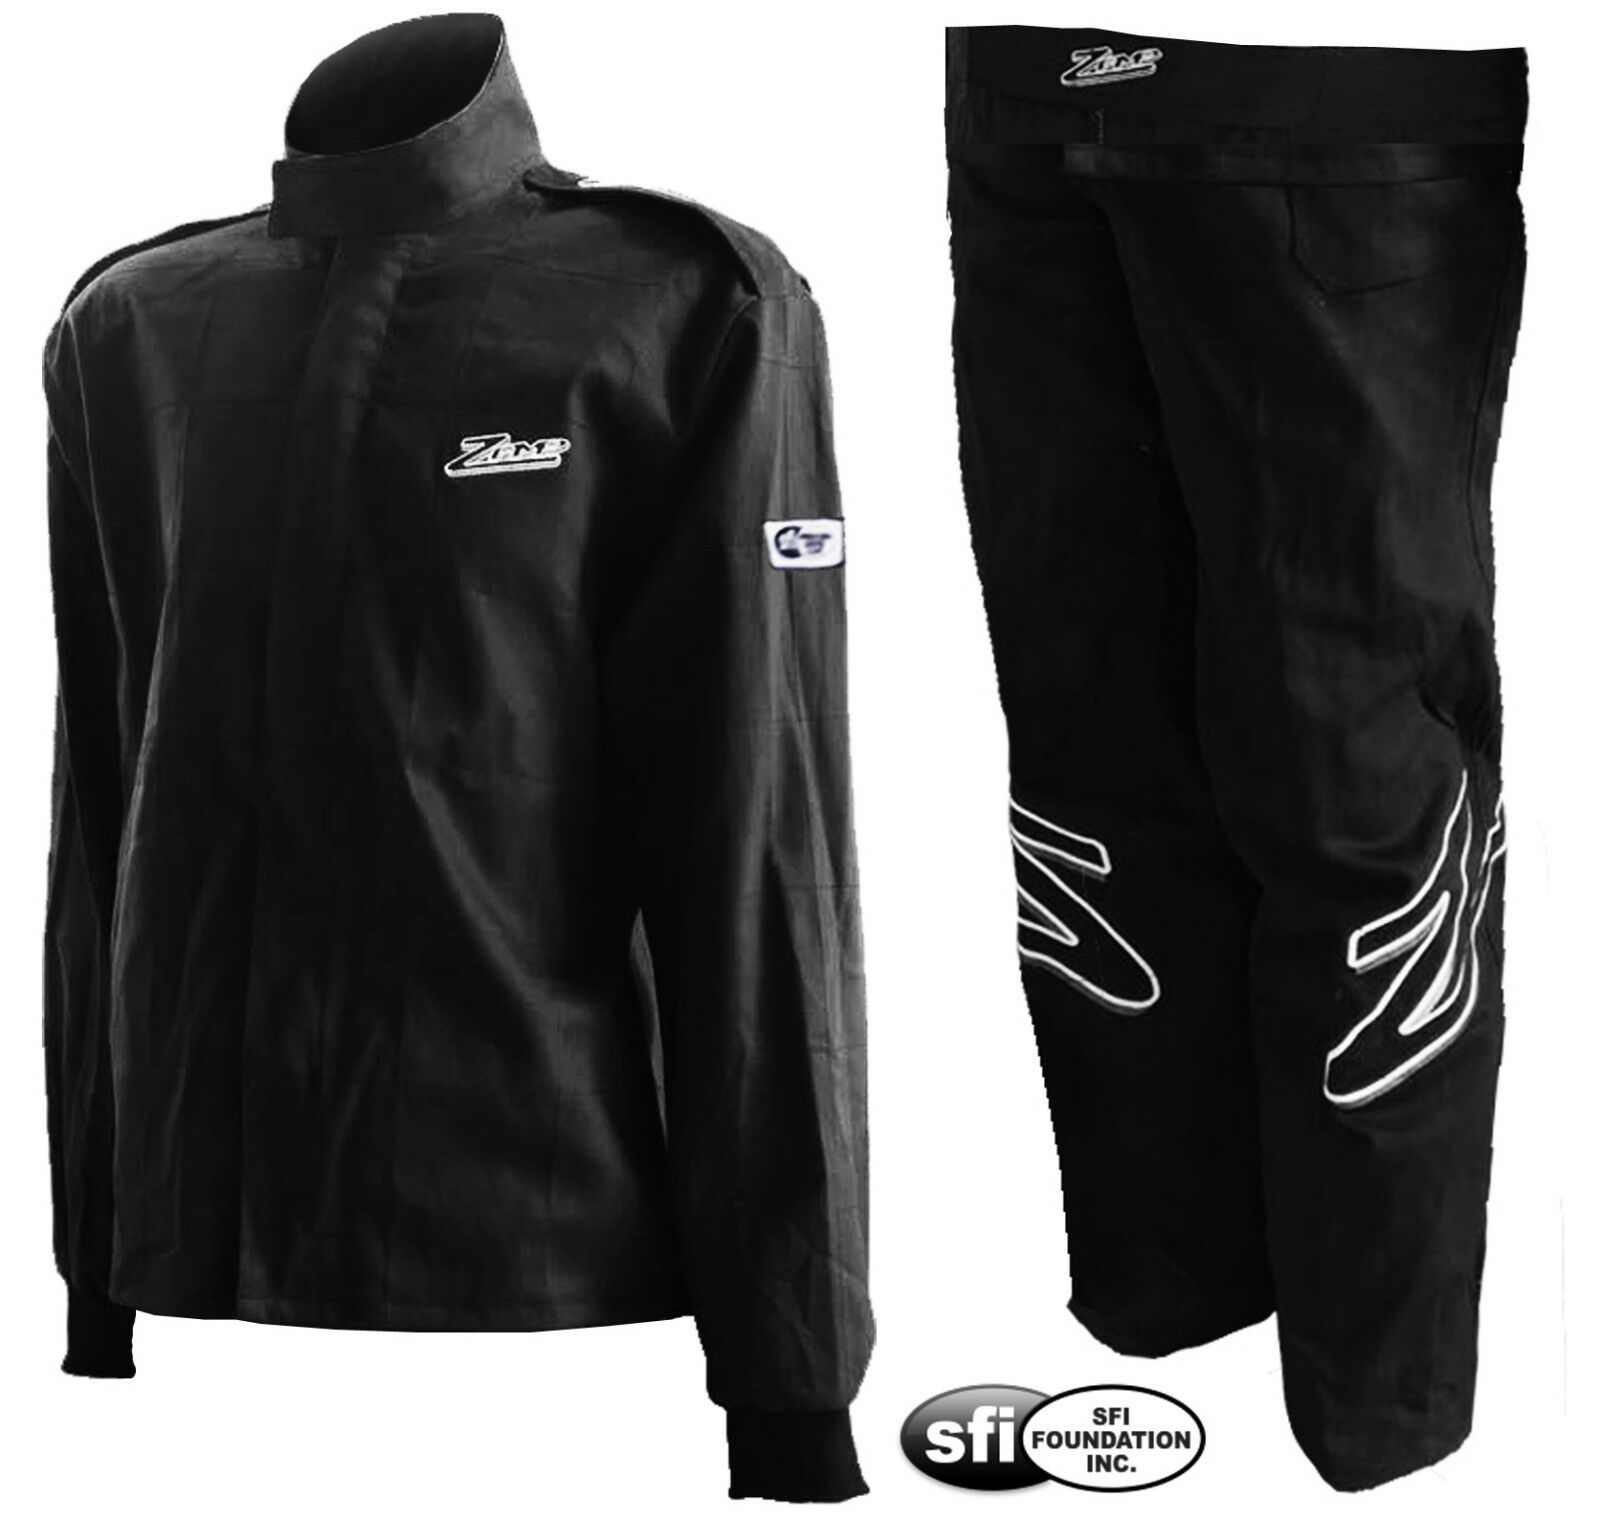 Zamp Zr-10 Sfi-1 Auto Racing Suit- 2-piece Jacket And Pants - Sfi 3.2a/1 Rated